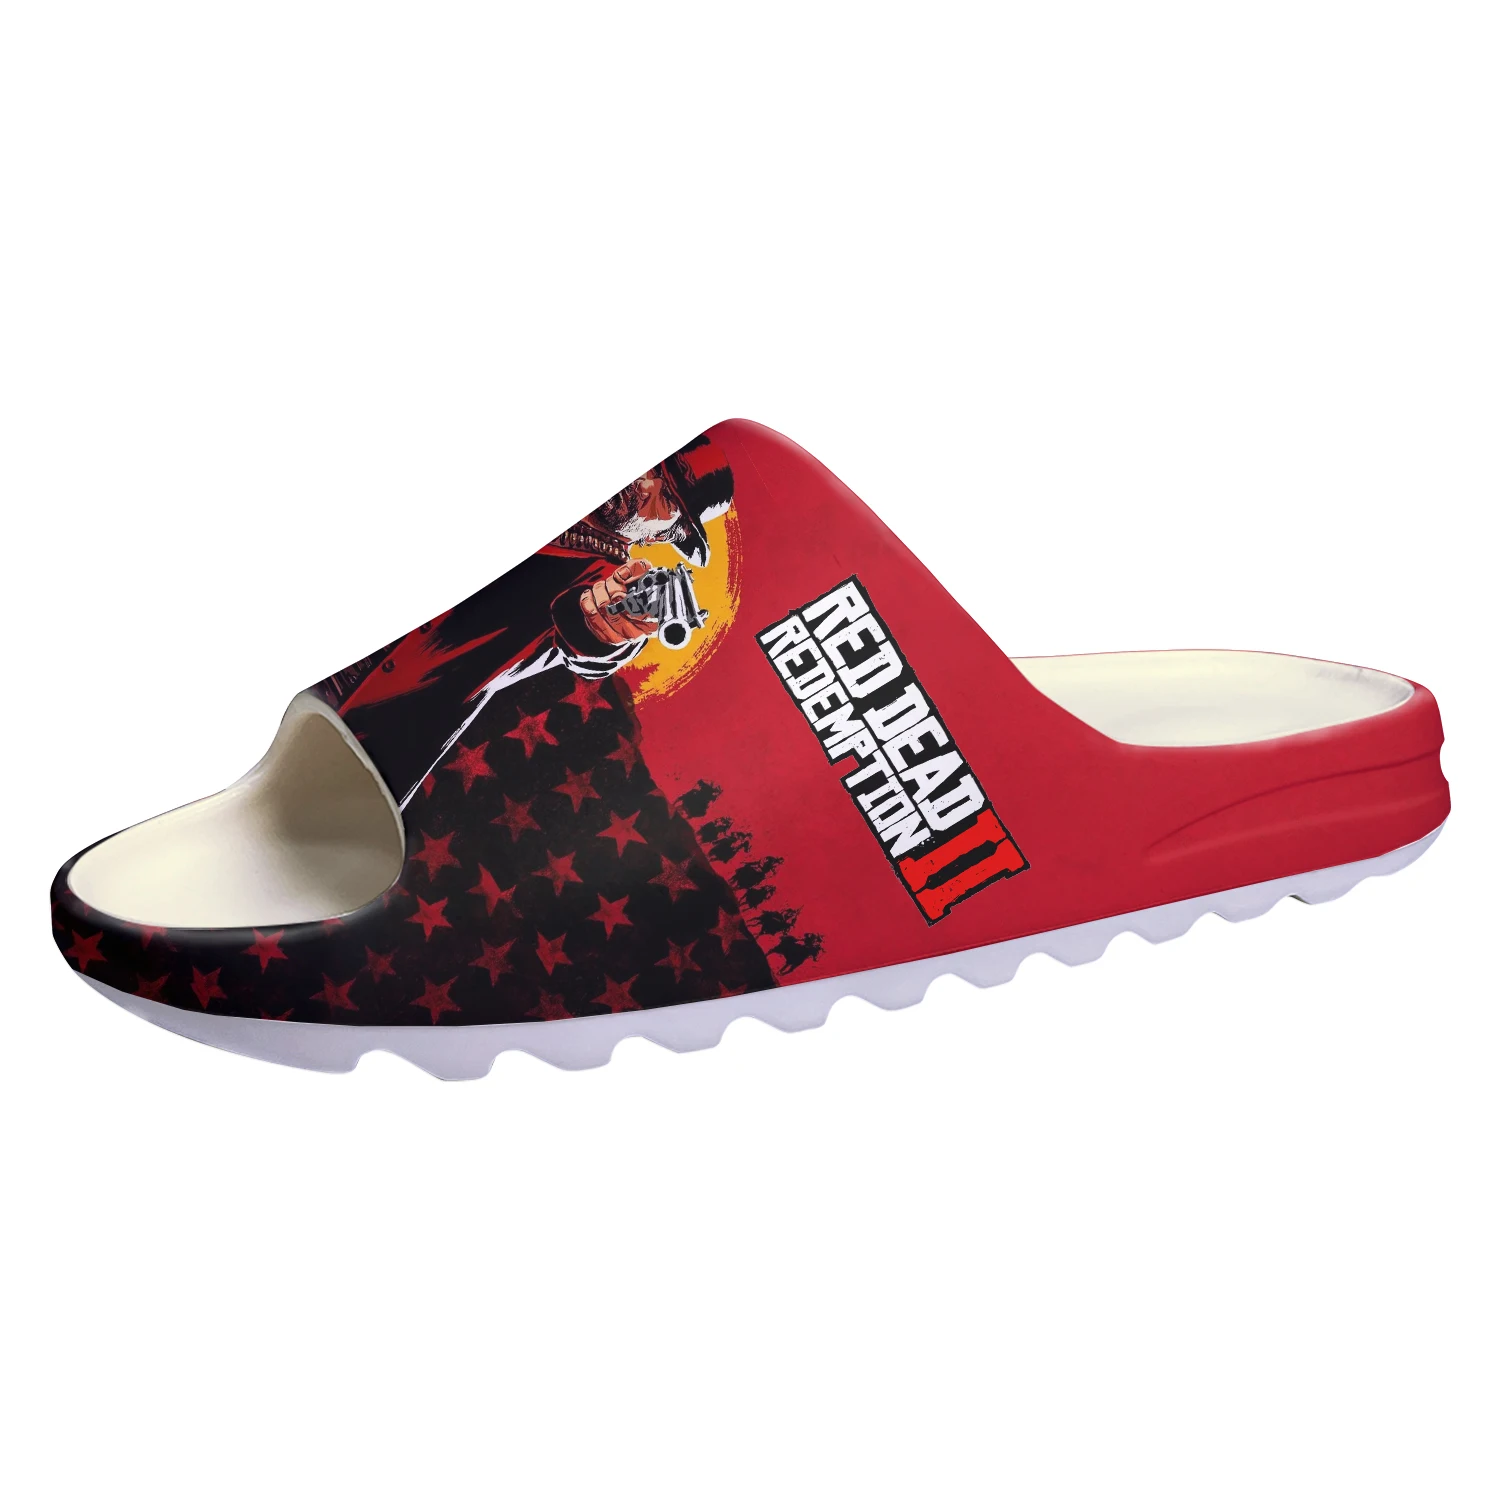 

Red Dead Redemption 2 Soft Sole Sllipers Home Clogs Customized Step On Water Shoes Mens Womens Teenager Step in Sandals